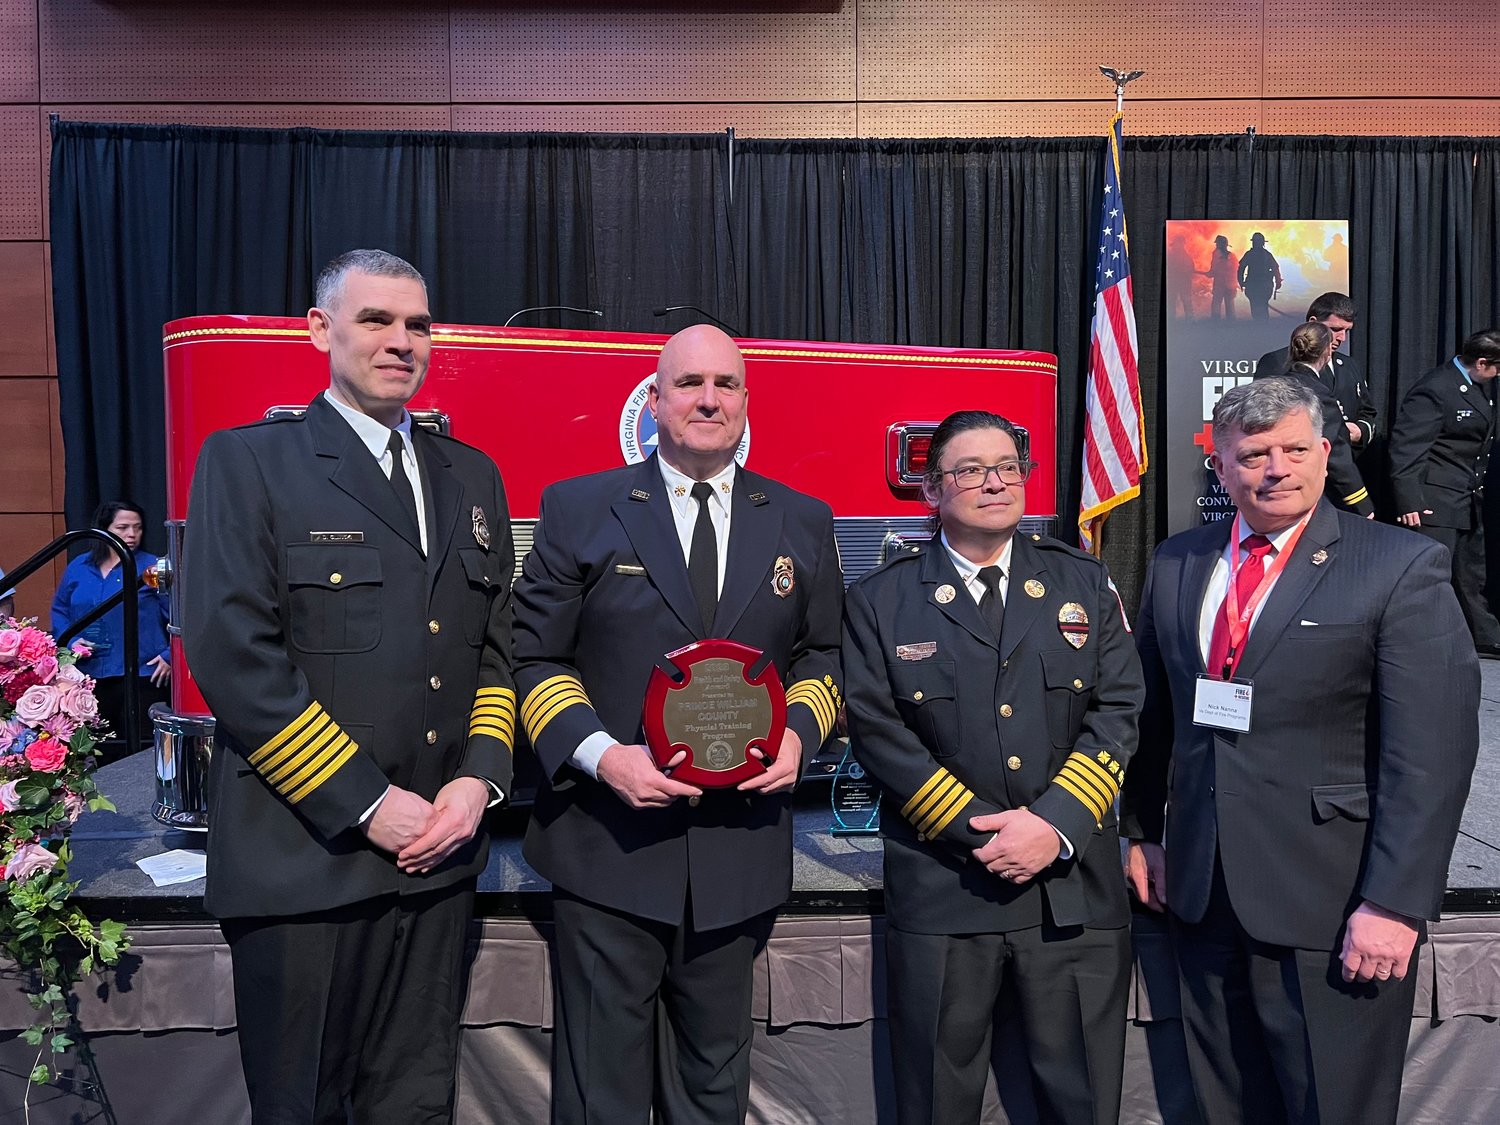 Accepting Virginia Fire Chiefs Foundation Health & Safety Award (left to right)

Prince William County Fire & Rescue System

Dave Glinski, President (Dumfries-Triangle VFD)

Acting Chief James Forgo (Prince William County Fire & Rescue System)

Assistant Chief Ernest DeSantis (Occoquan-Woodbridge-Lorton VFD)

Chief Nicholas Nanna (Dumfries-Triangle VFD)